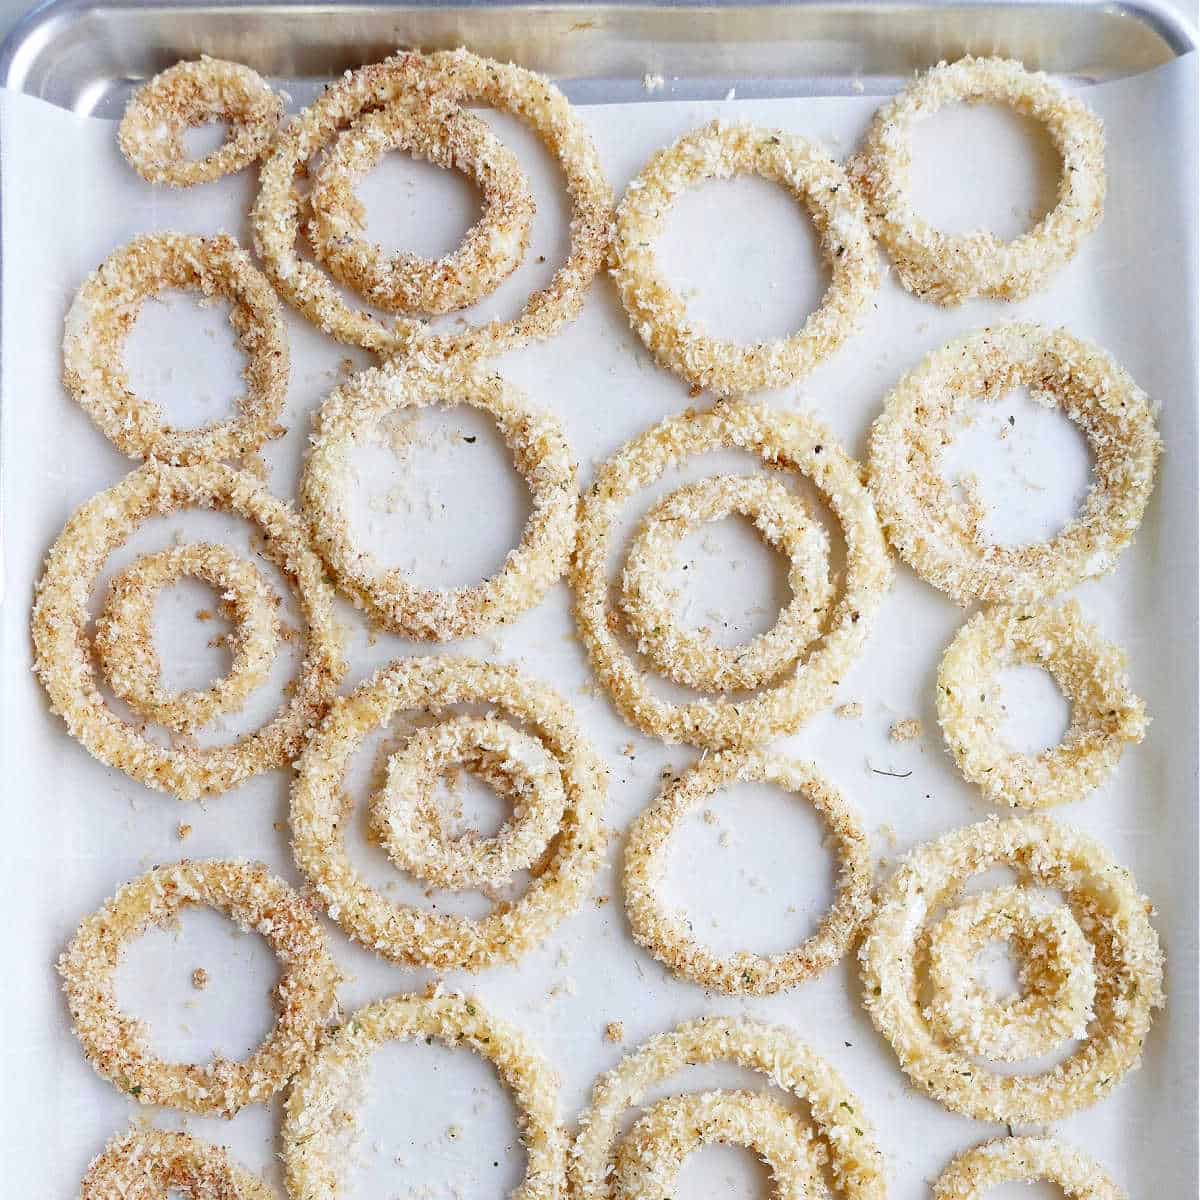 panko onion rings coated in breading on a lined baking sheet